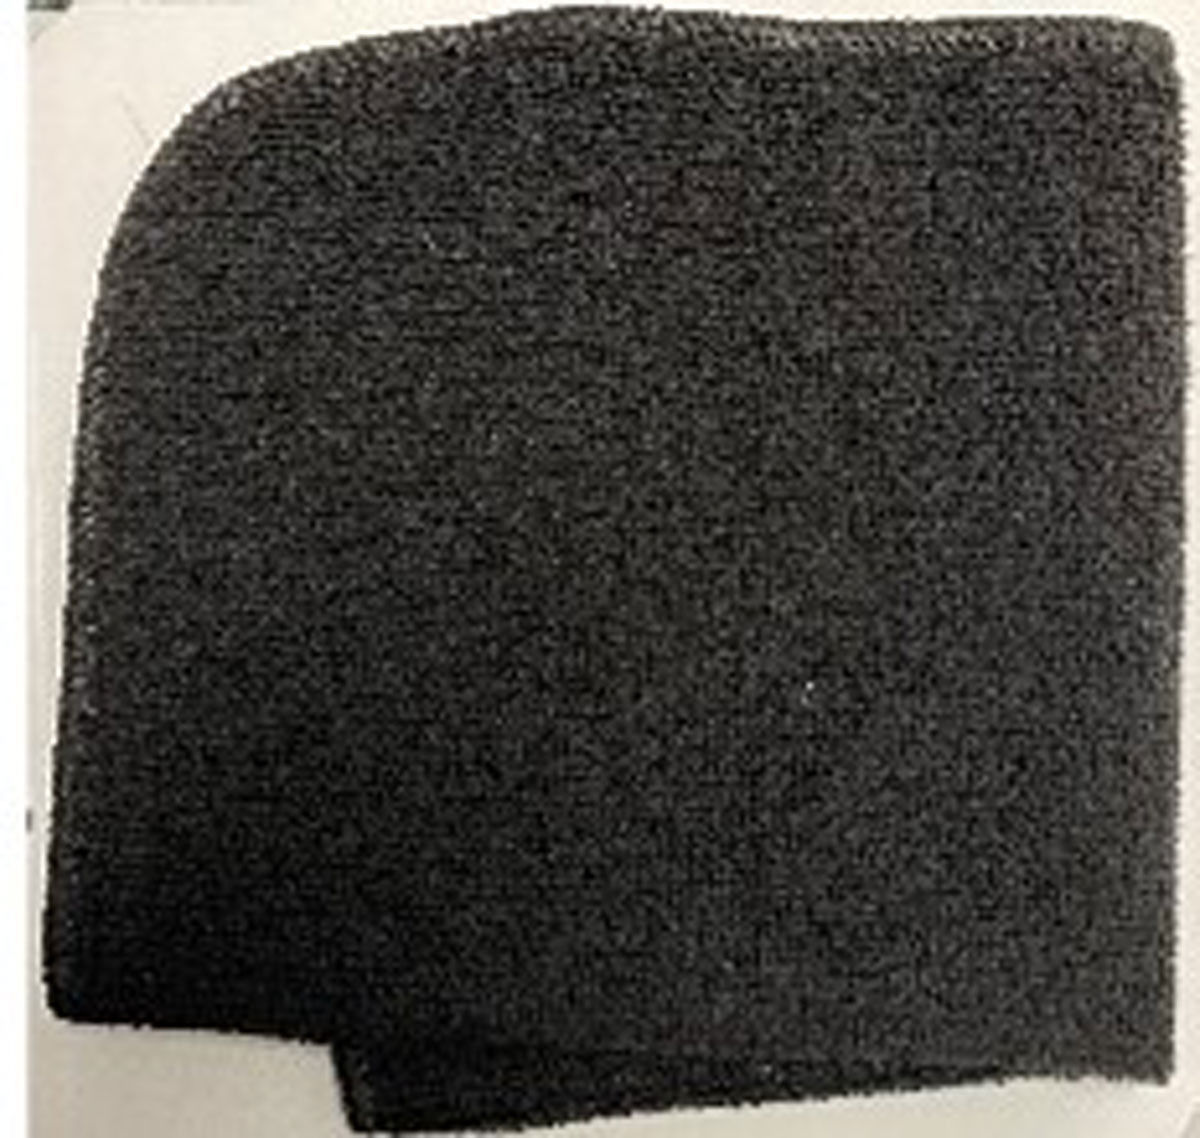 Can these black microfiber towels be used on any surface?